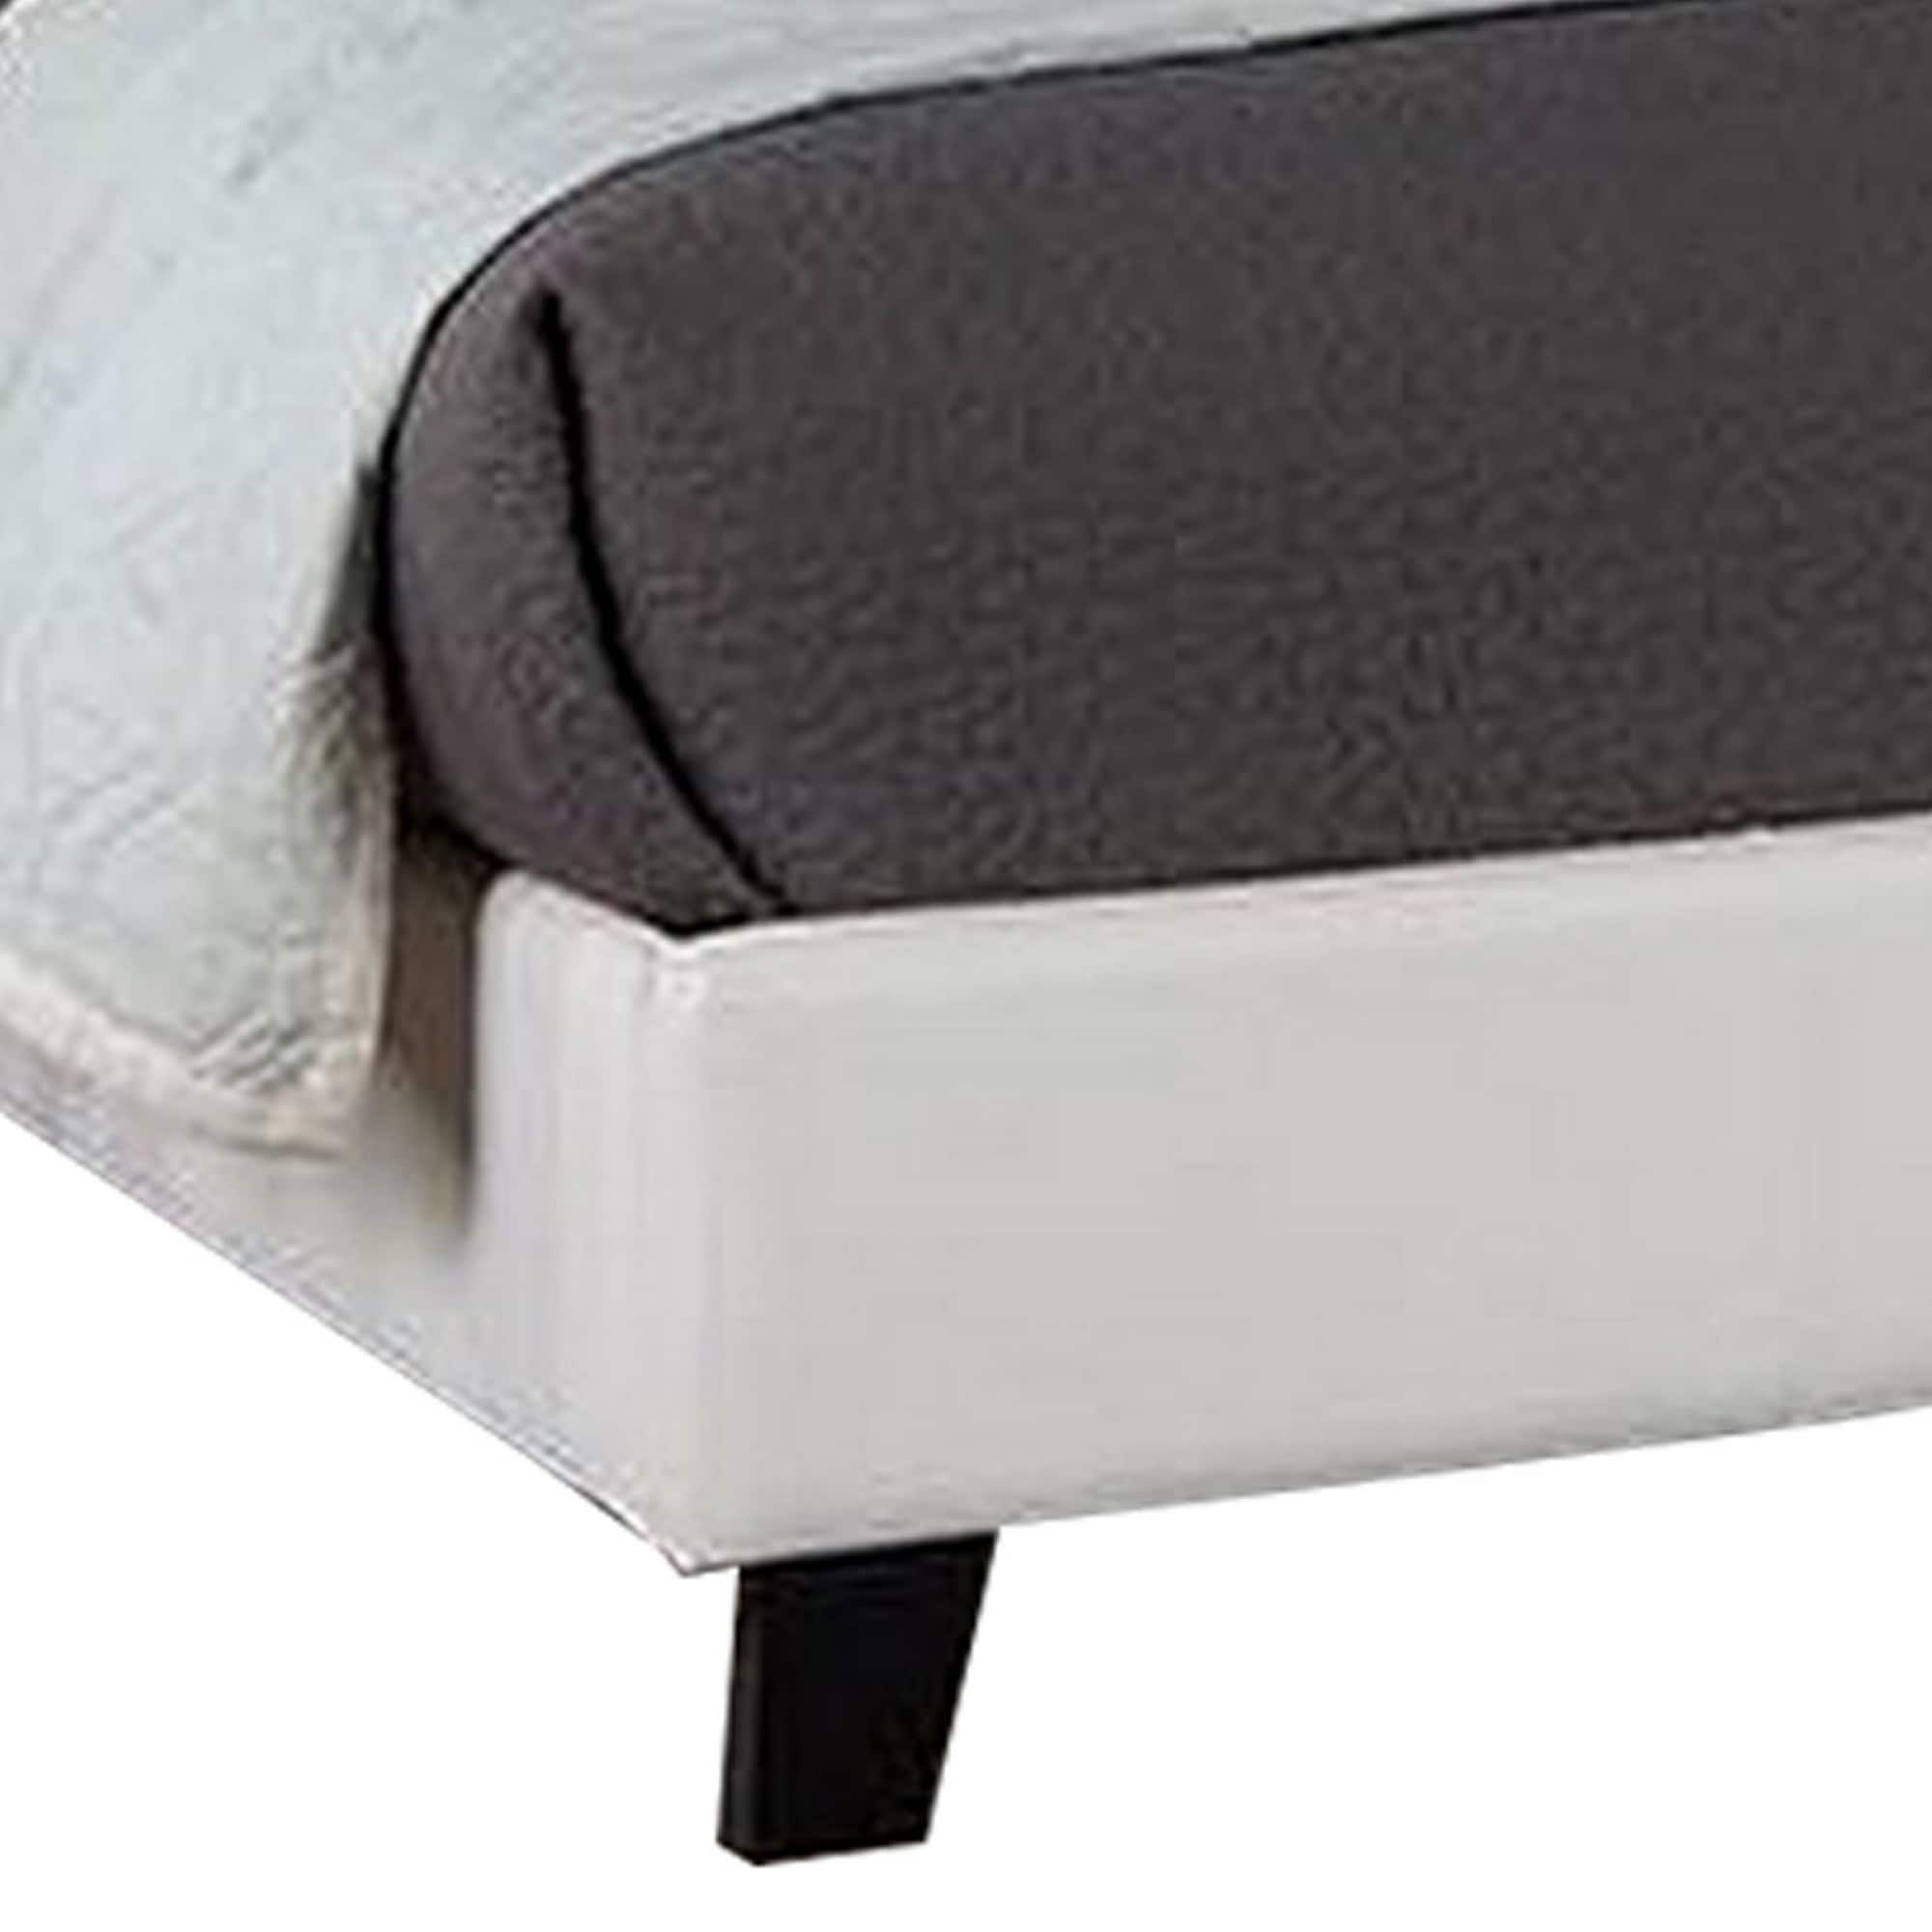 Amy Queen Size Platform Bed, Vegan Faux Leather Upholstery, White - Bed ...